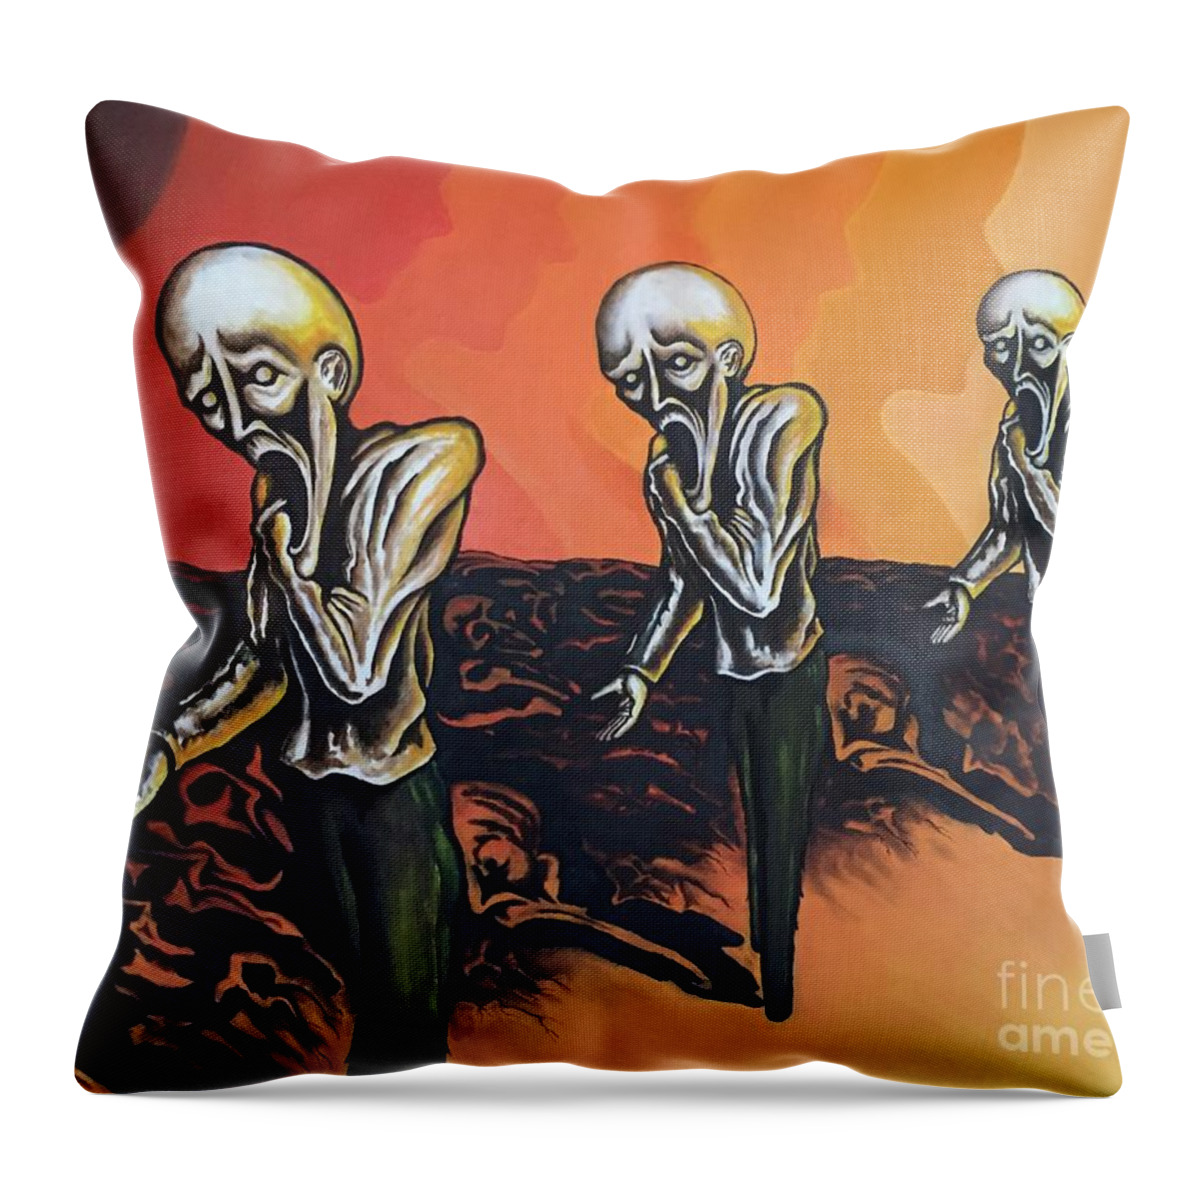 Tmad Throw Pillow featuring the painting Question to wonder by Michael TMAD Finney